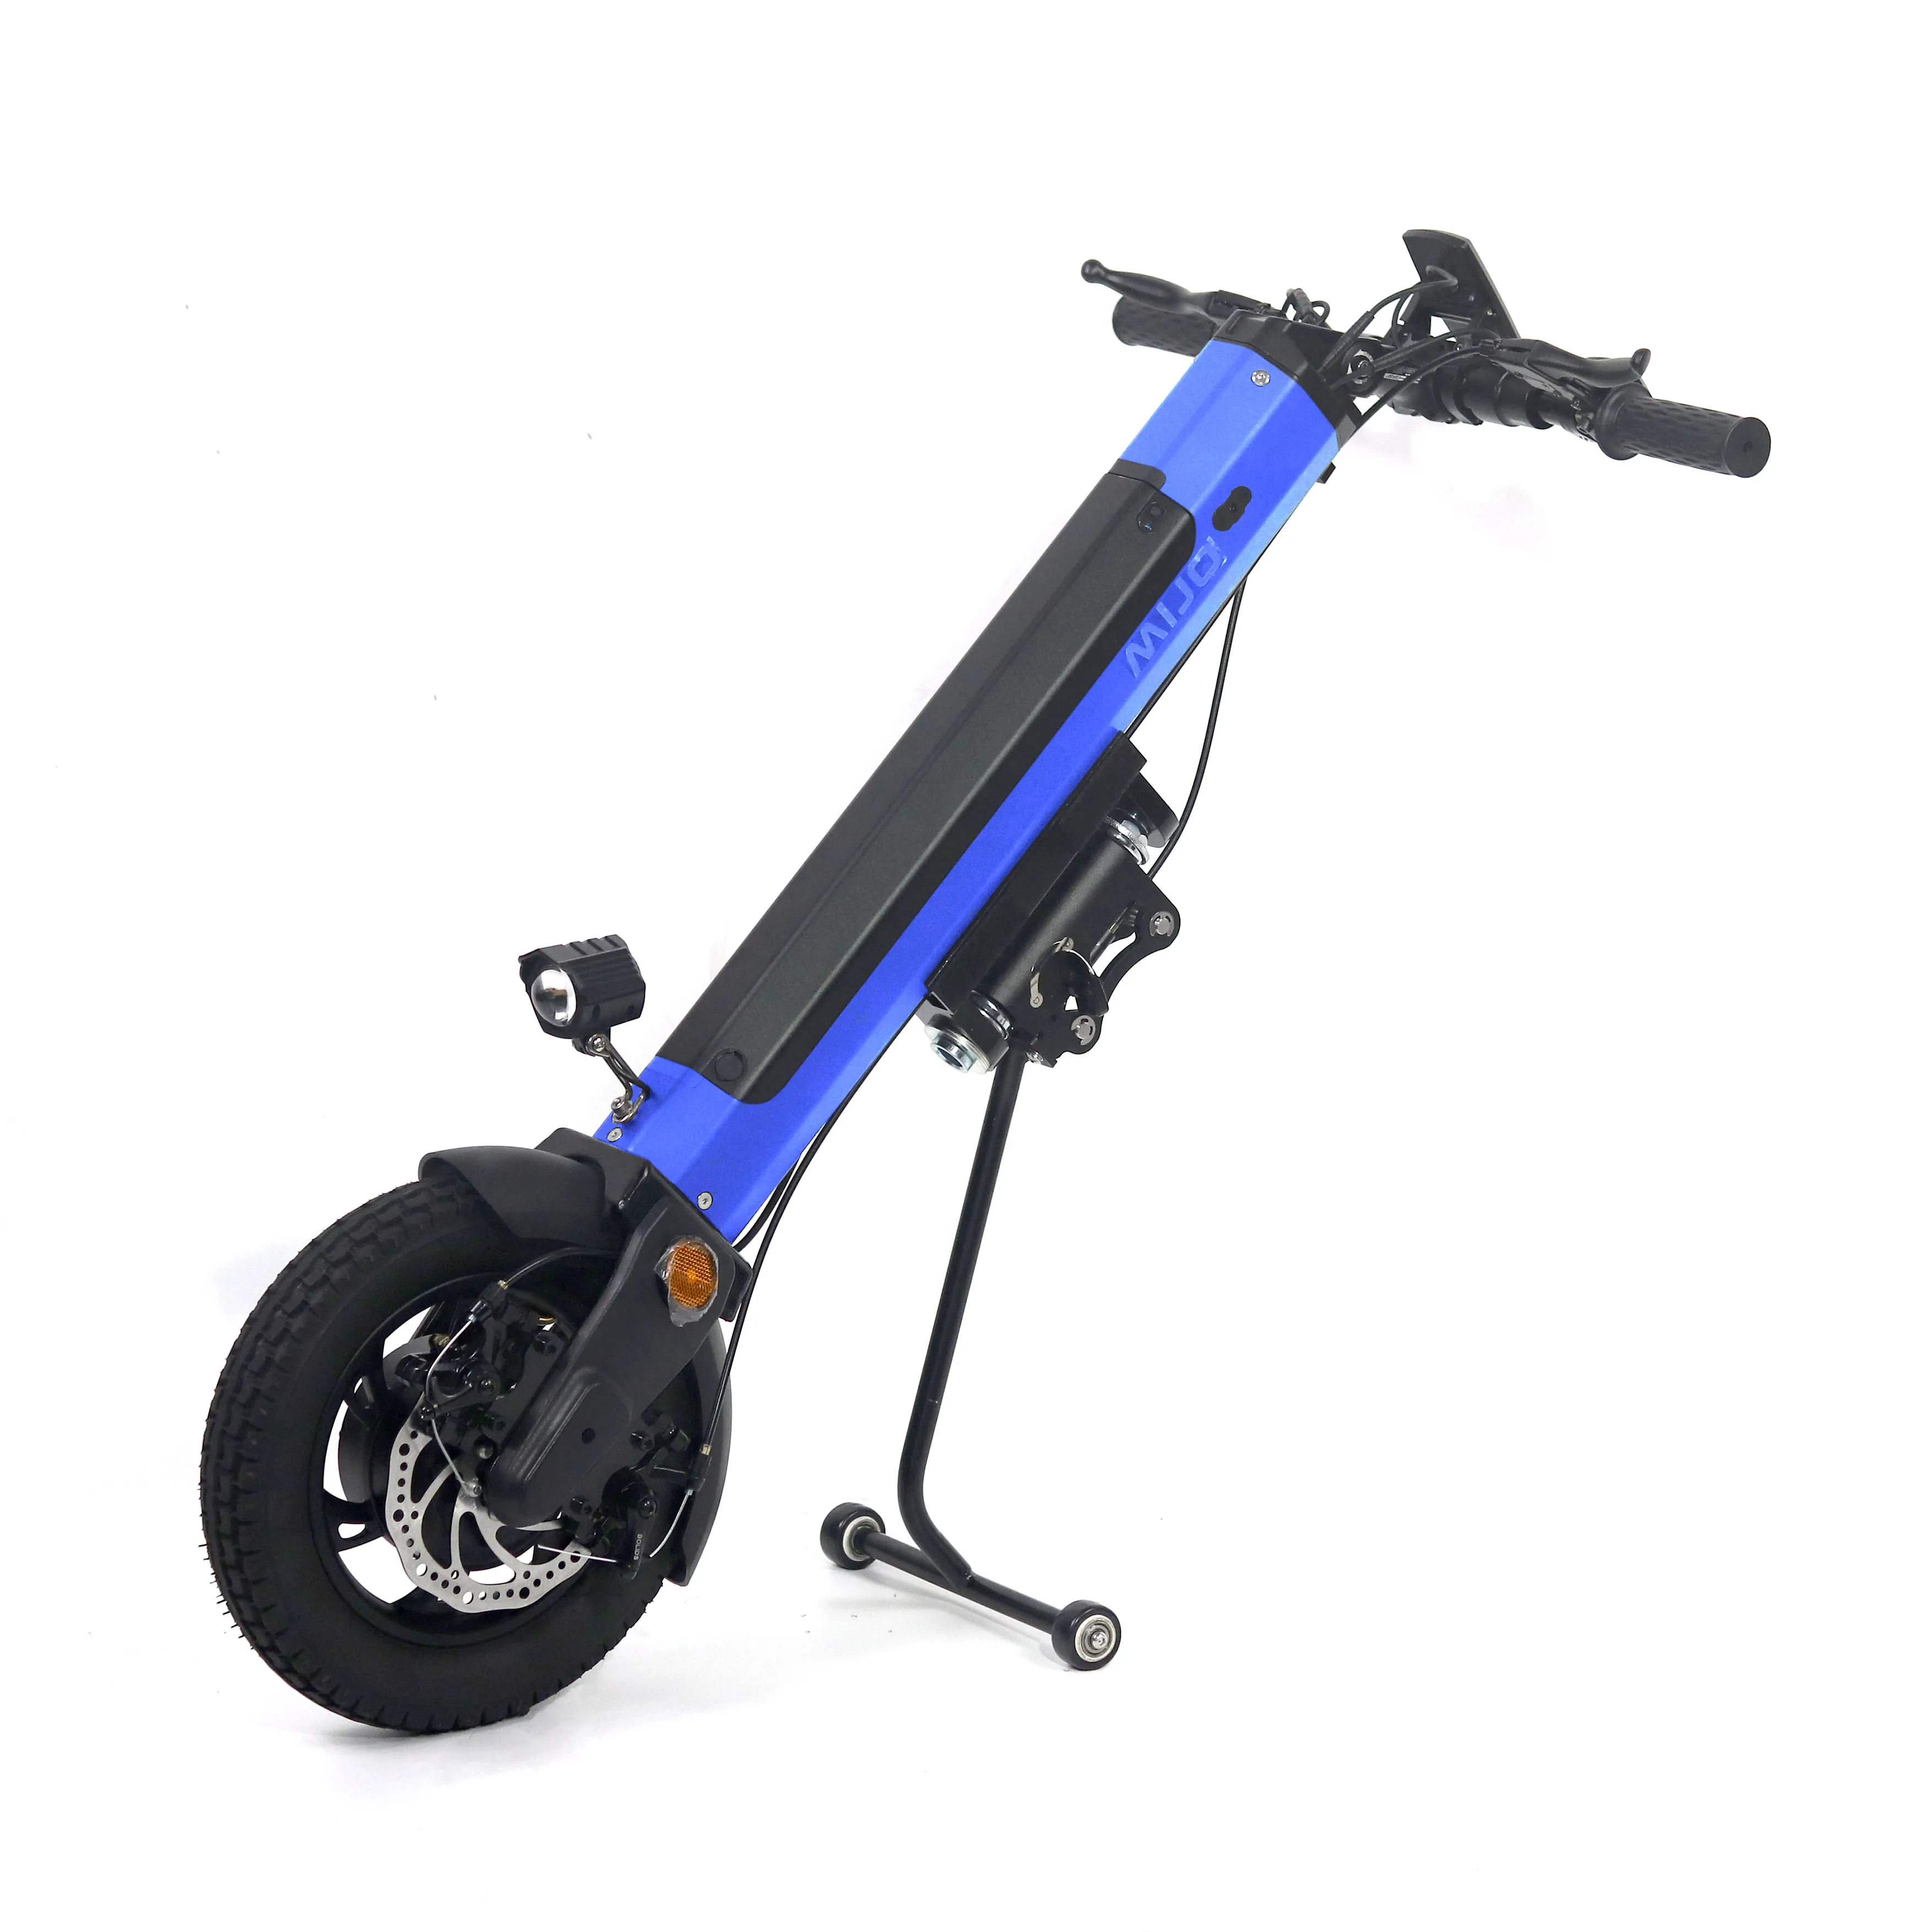 48v 350w 500w motor electric handcycle tractor with 8ah 16ah lithium battery range 65 km Portable and Comfortable Electric Handcycle Wheelchair Attachment 350W Wheelchair Drive Head with 36V 13Ah Lithium battery